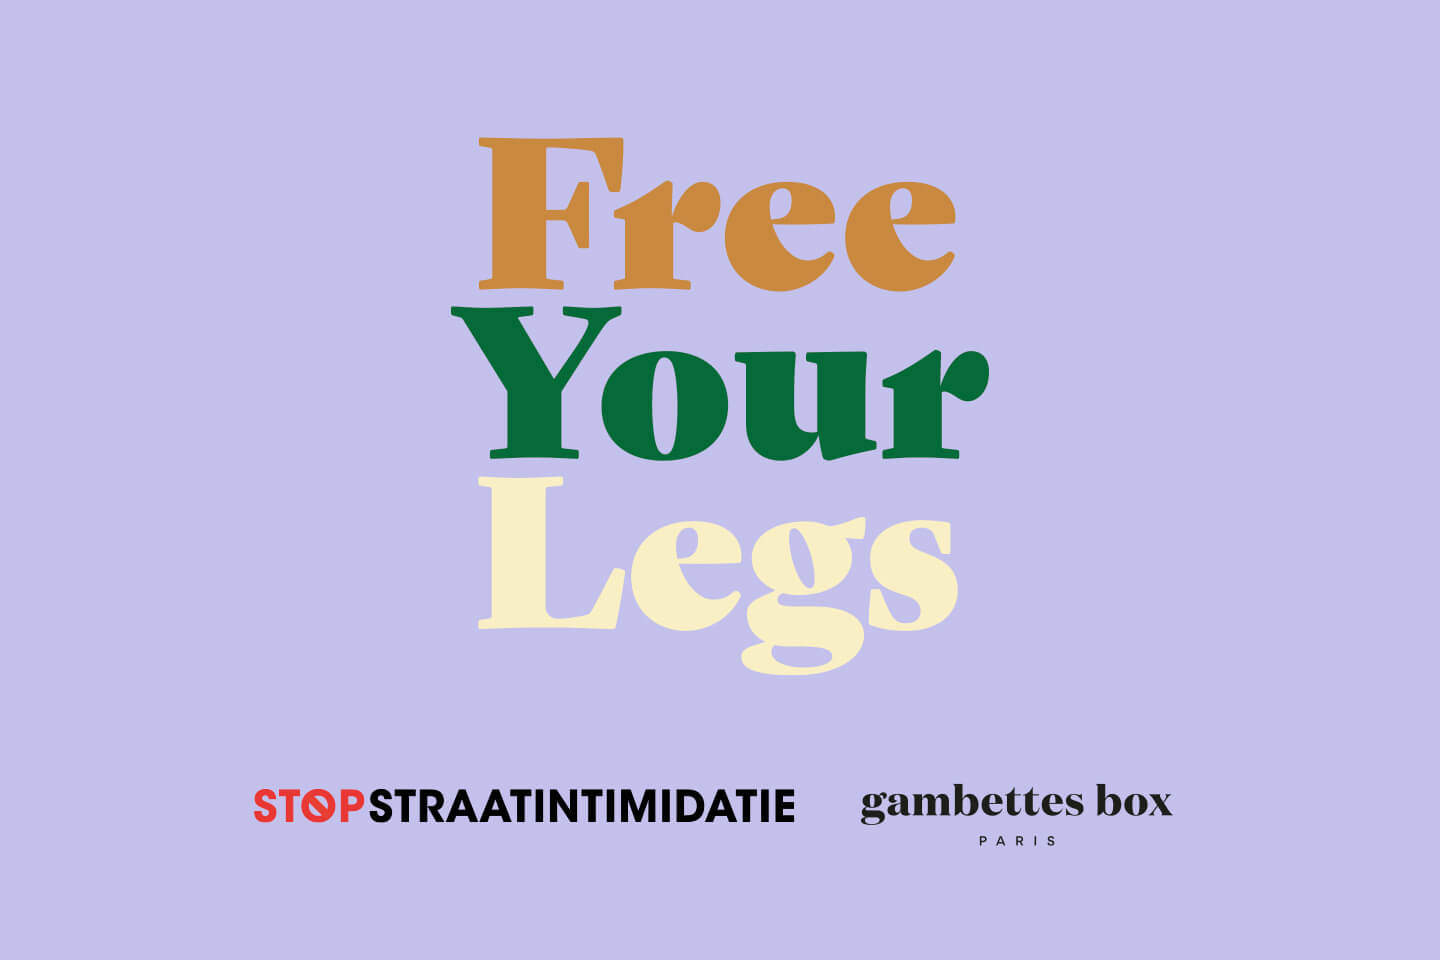 free your legs image